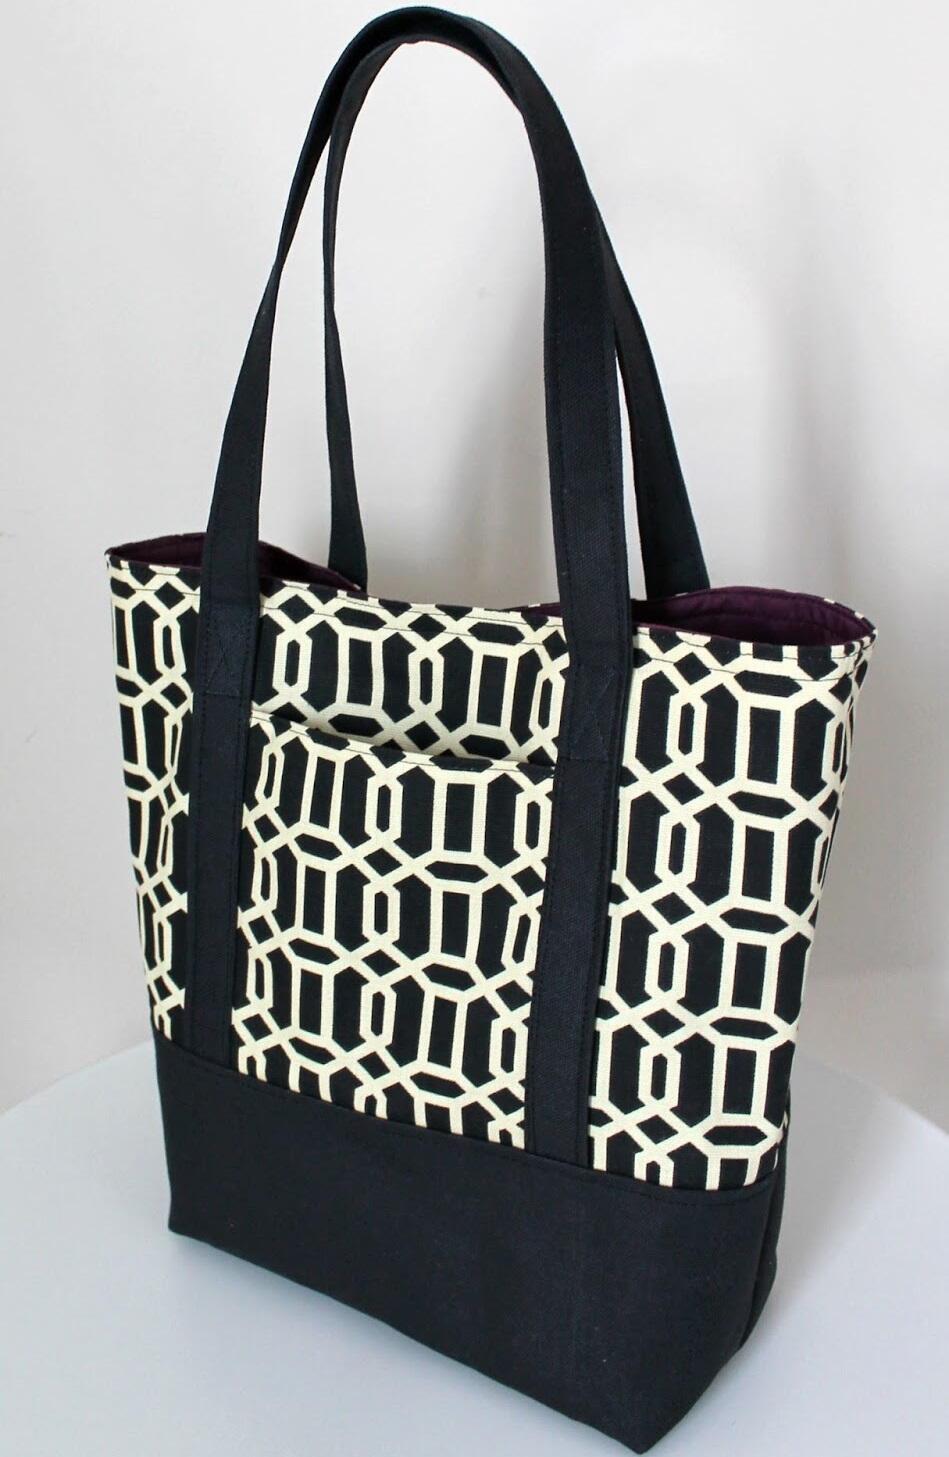 13 Step Canvas Tote | AllFreeSewing.com